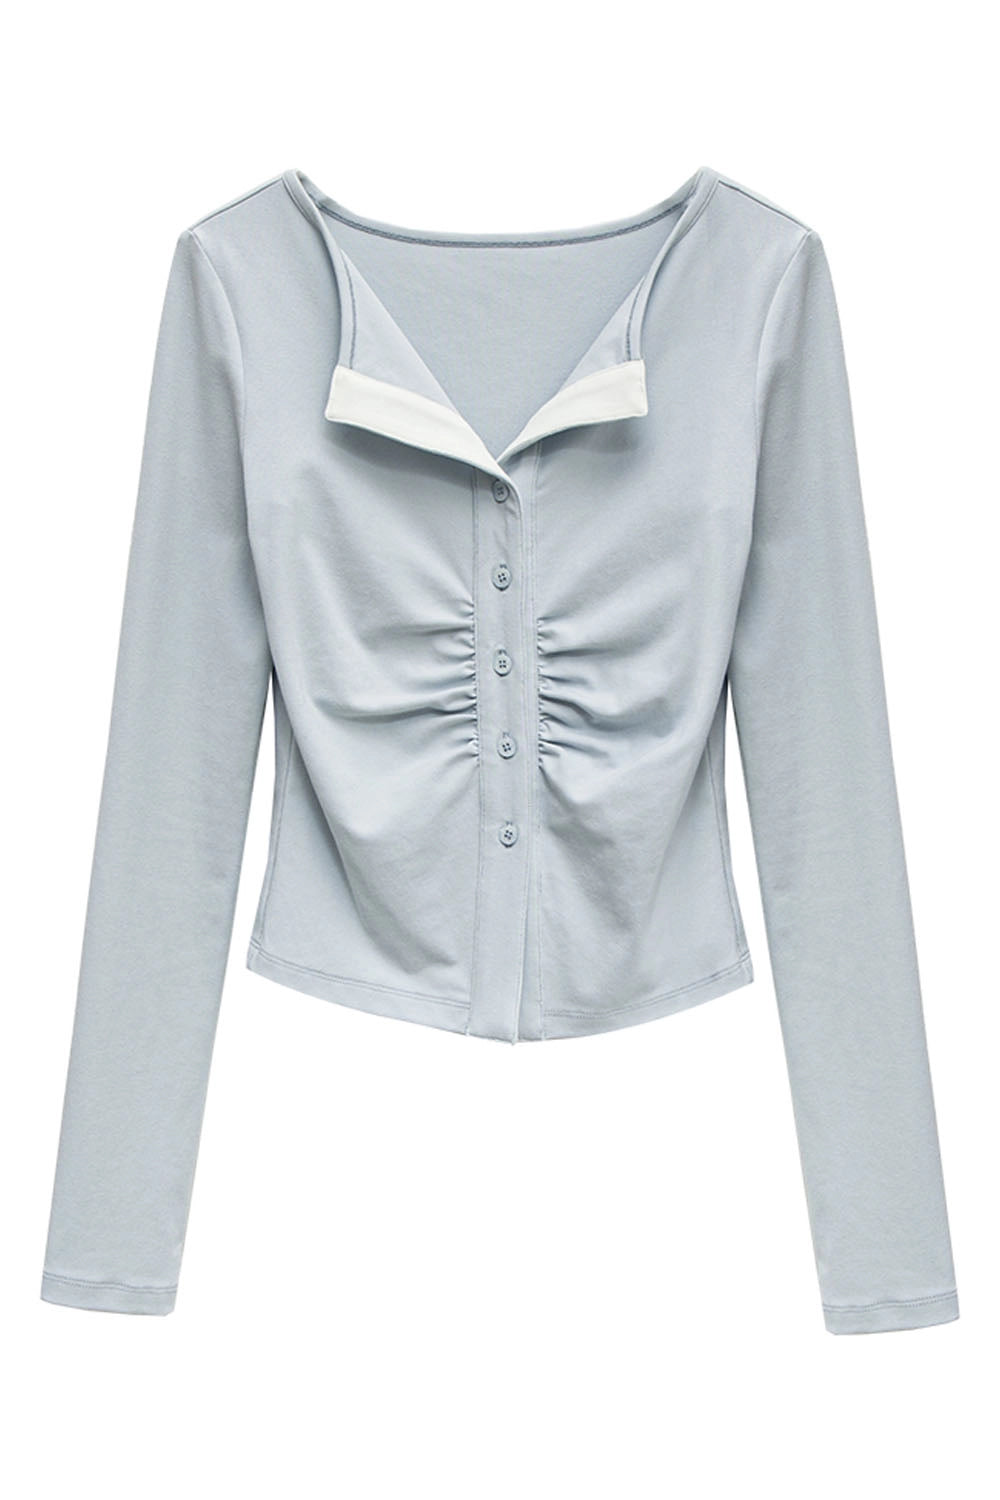 Women's Contrast Trim Button-Up Fitted Cardigan